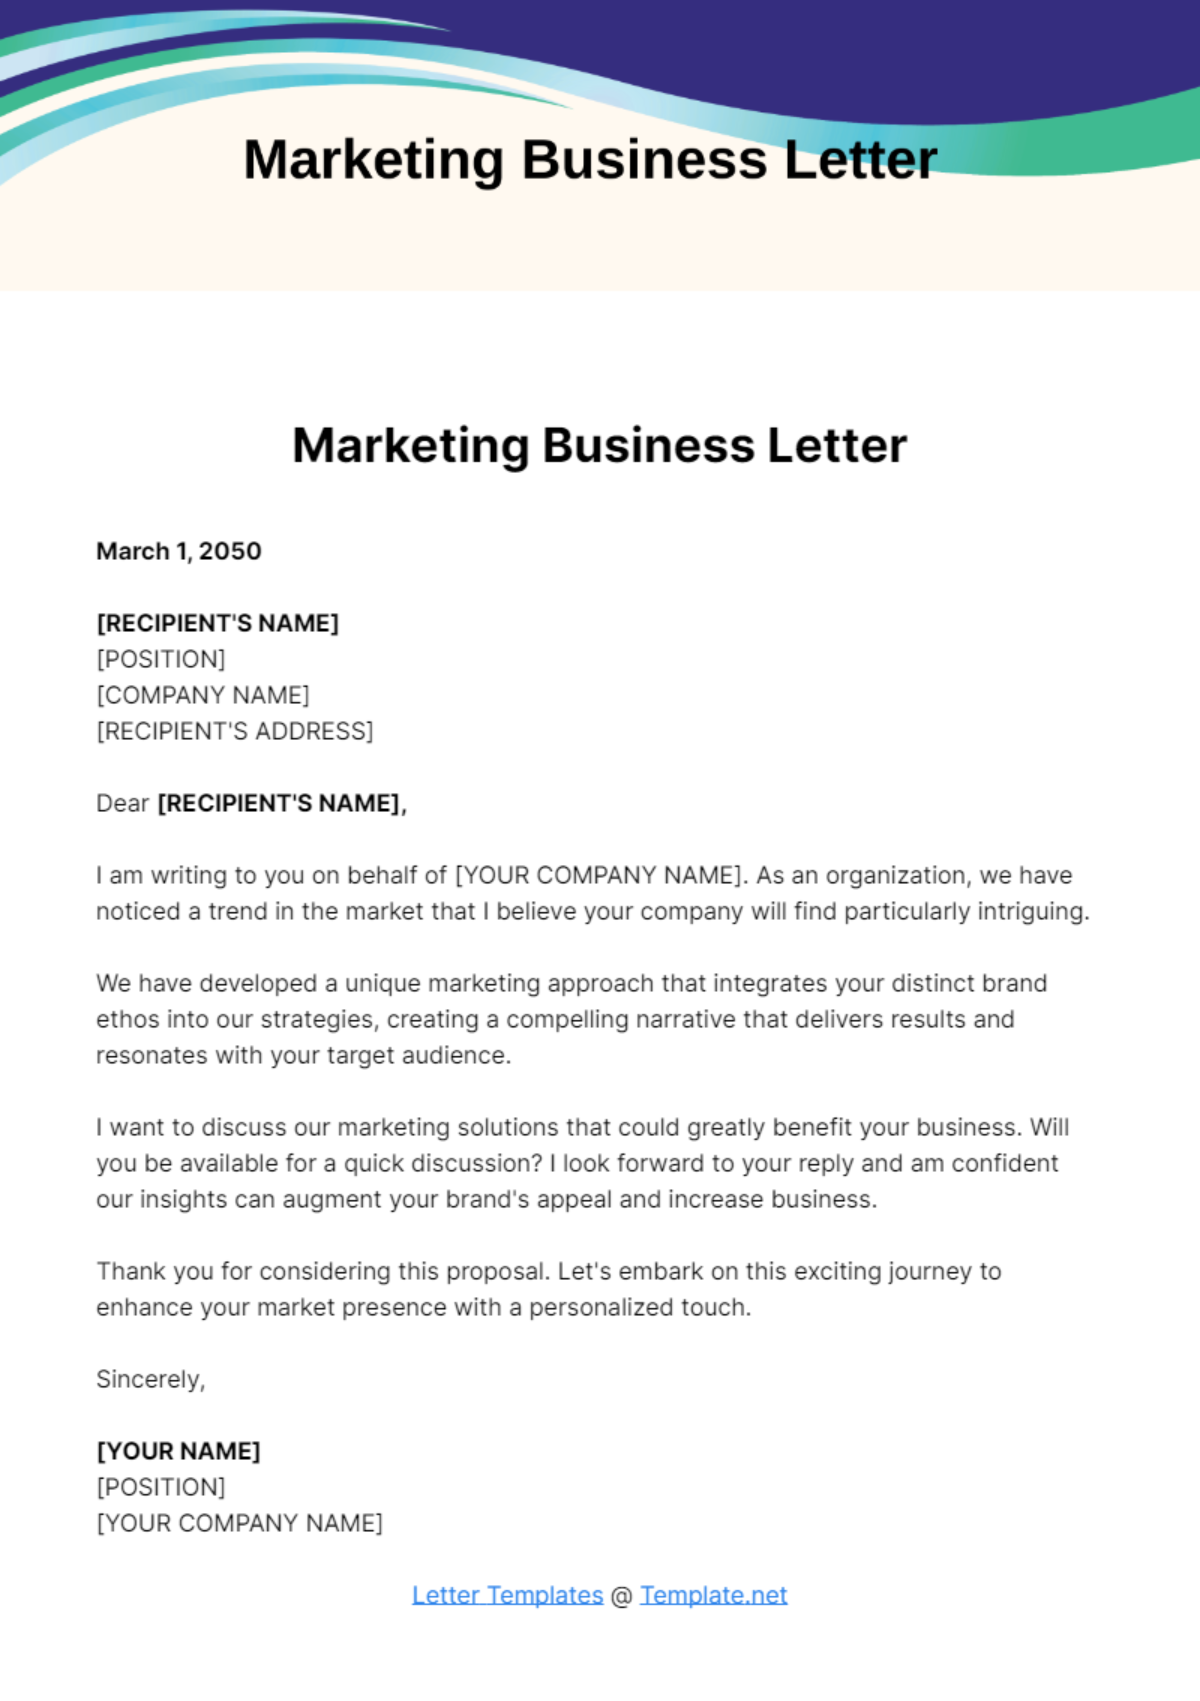 Marketing Business Letter Template